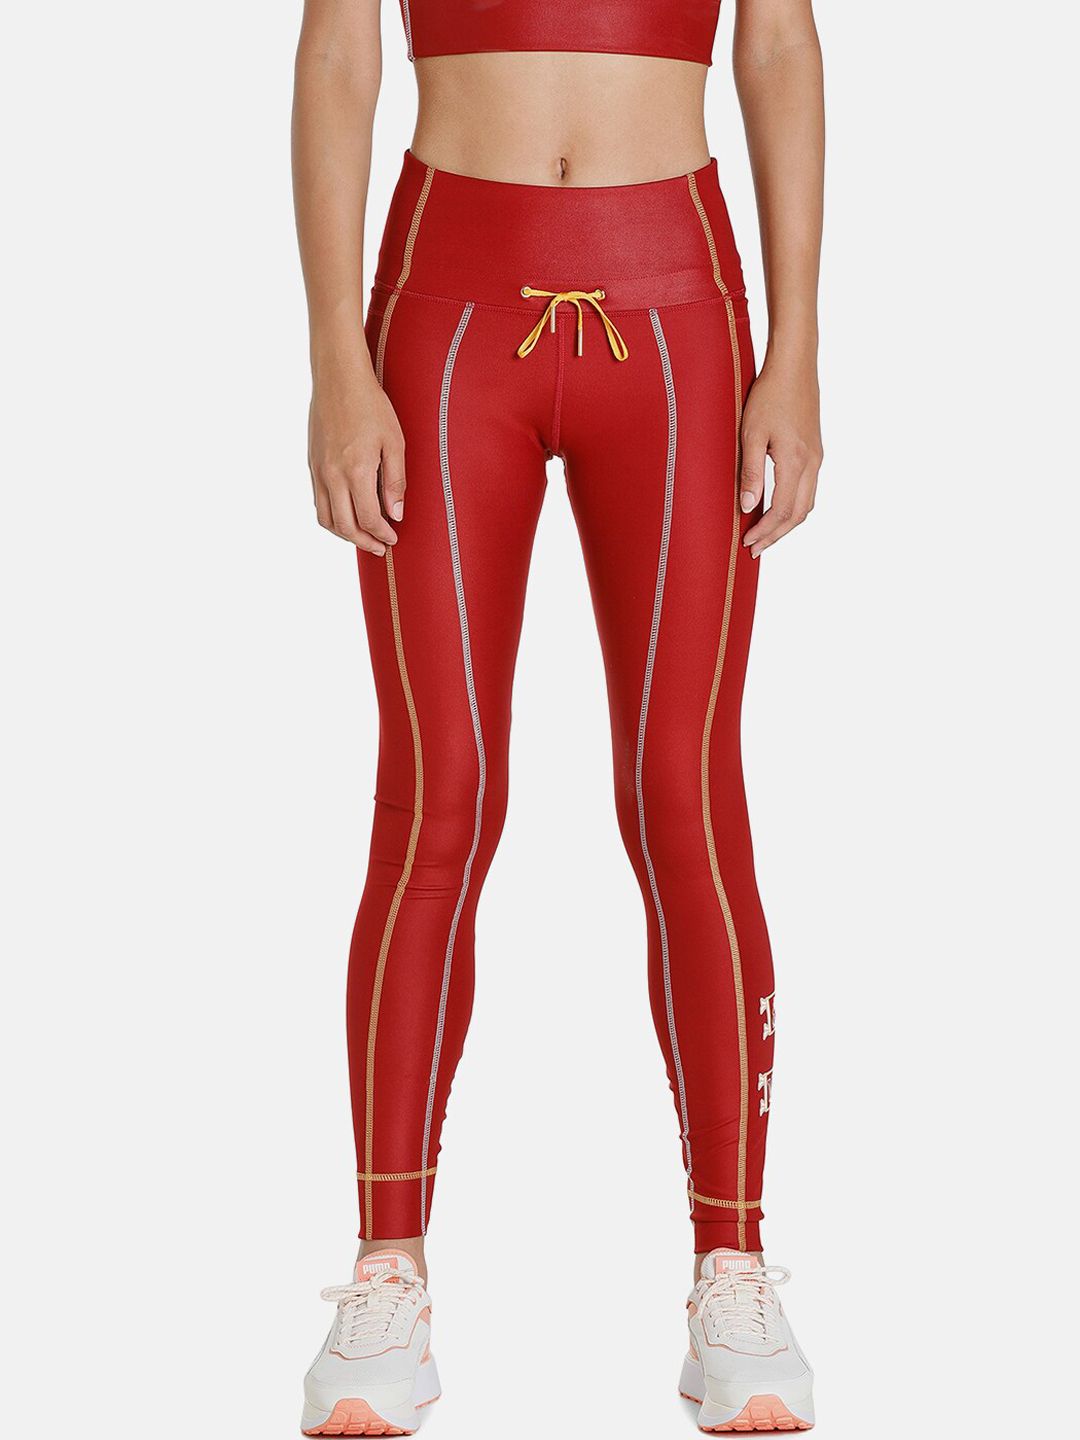 Puma Women Red Printed Sports Tights Price in India